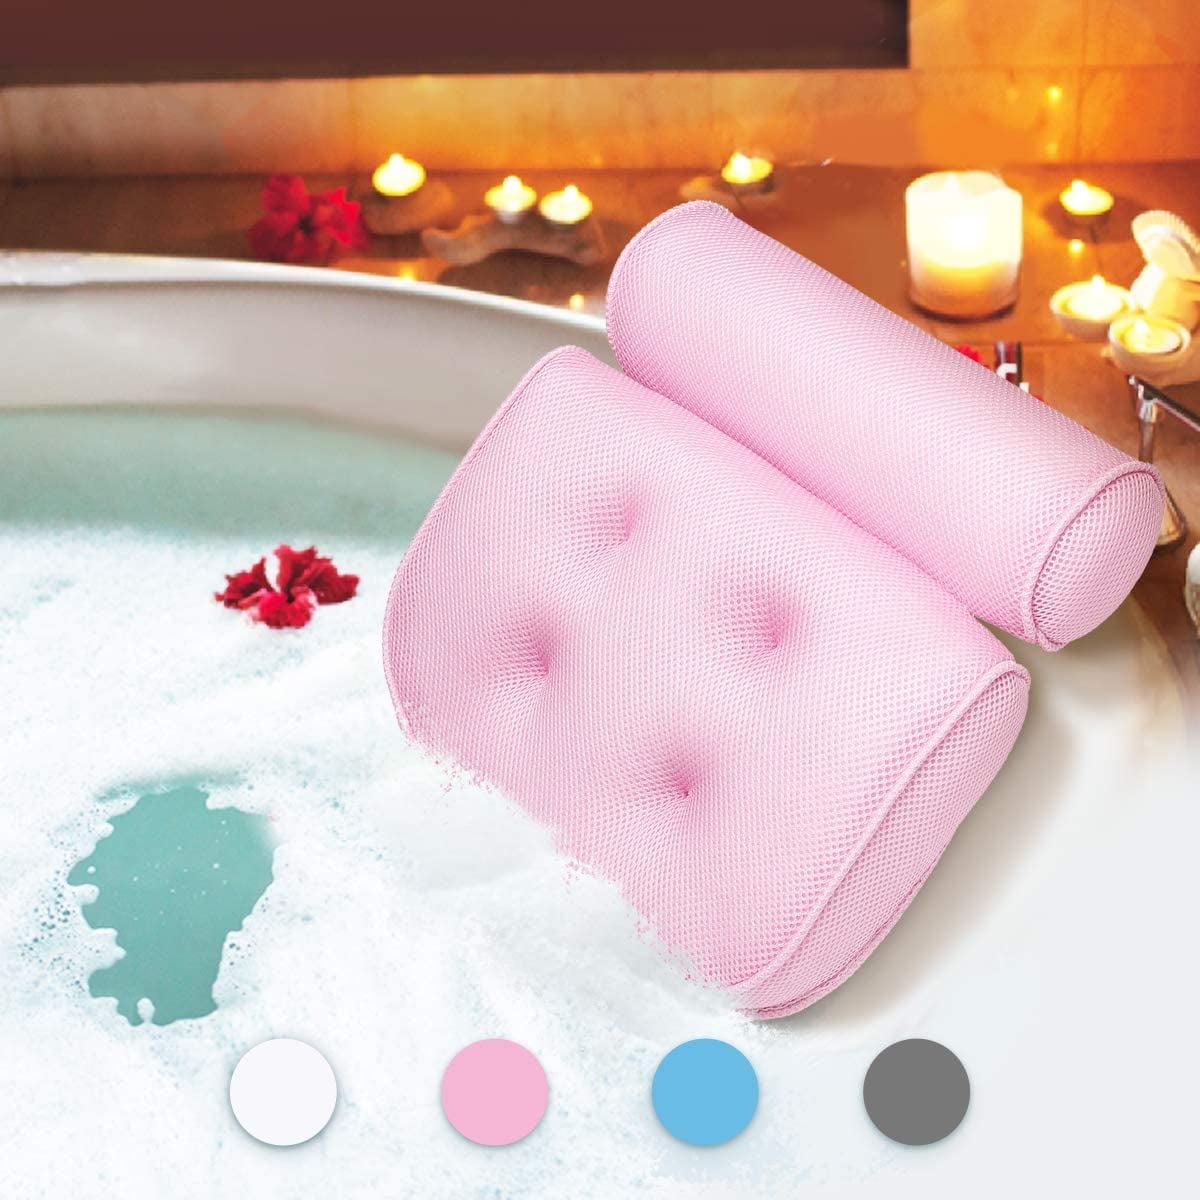 Pink Bath Pillow 3D Mesh Waterproof Ergonomic Home Spa Headrest with 6 Suction Cups for Bathtub Spa Jacuzzi